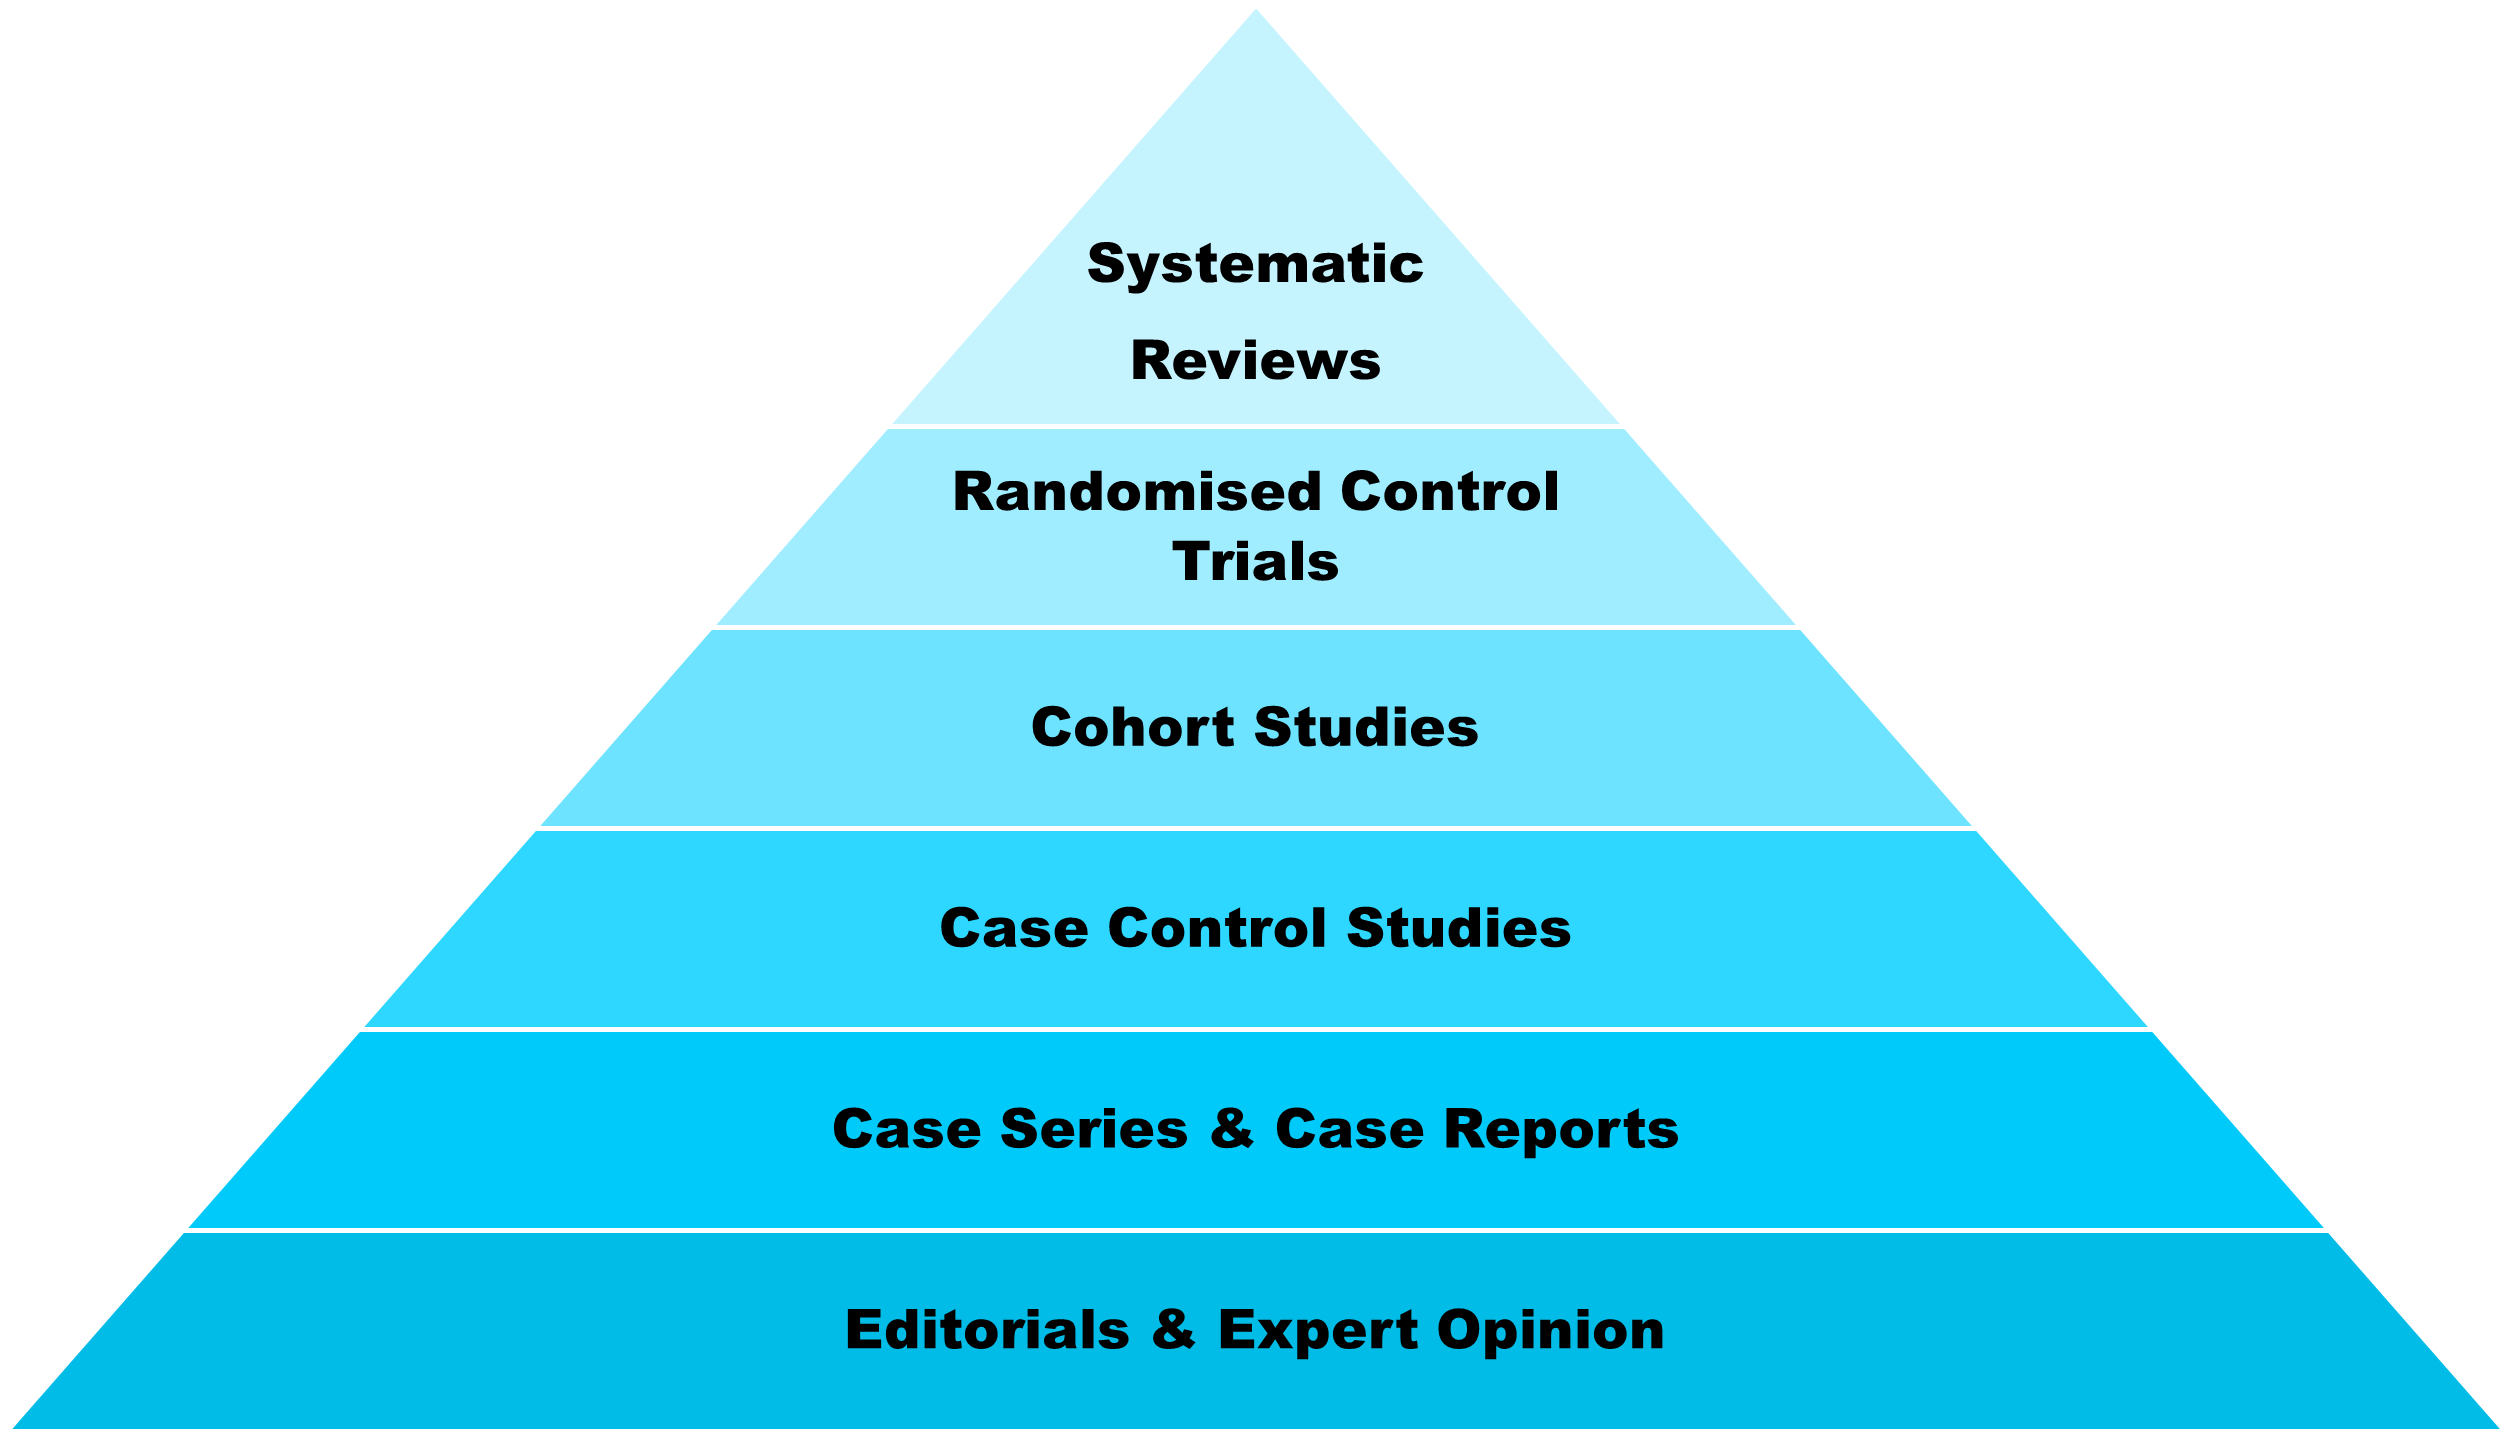 The hierarchy of evidence pyramid. This pyramid is broken up into stacked segments. The bottom segment is editorials and expert opinions, moving up through case series & case reports, case control studies, cohort studies, randomised control trials and ending at the top with systematic reviews which are the highest regarded form of evidence